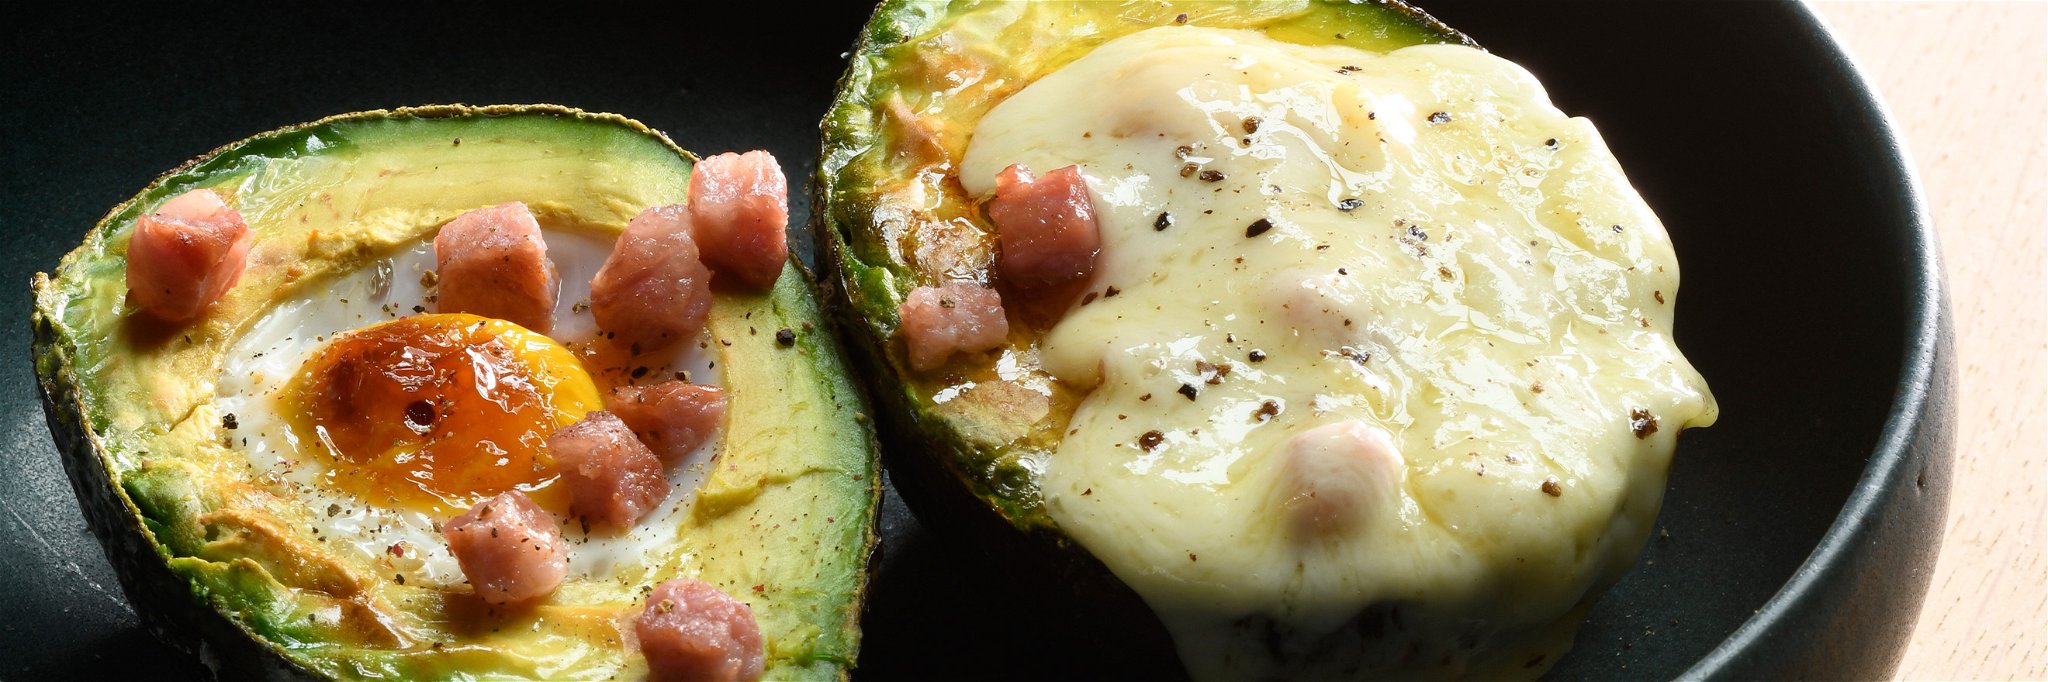 Avocado with Raclette